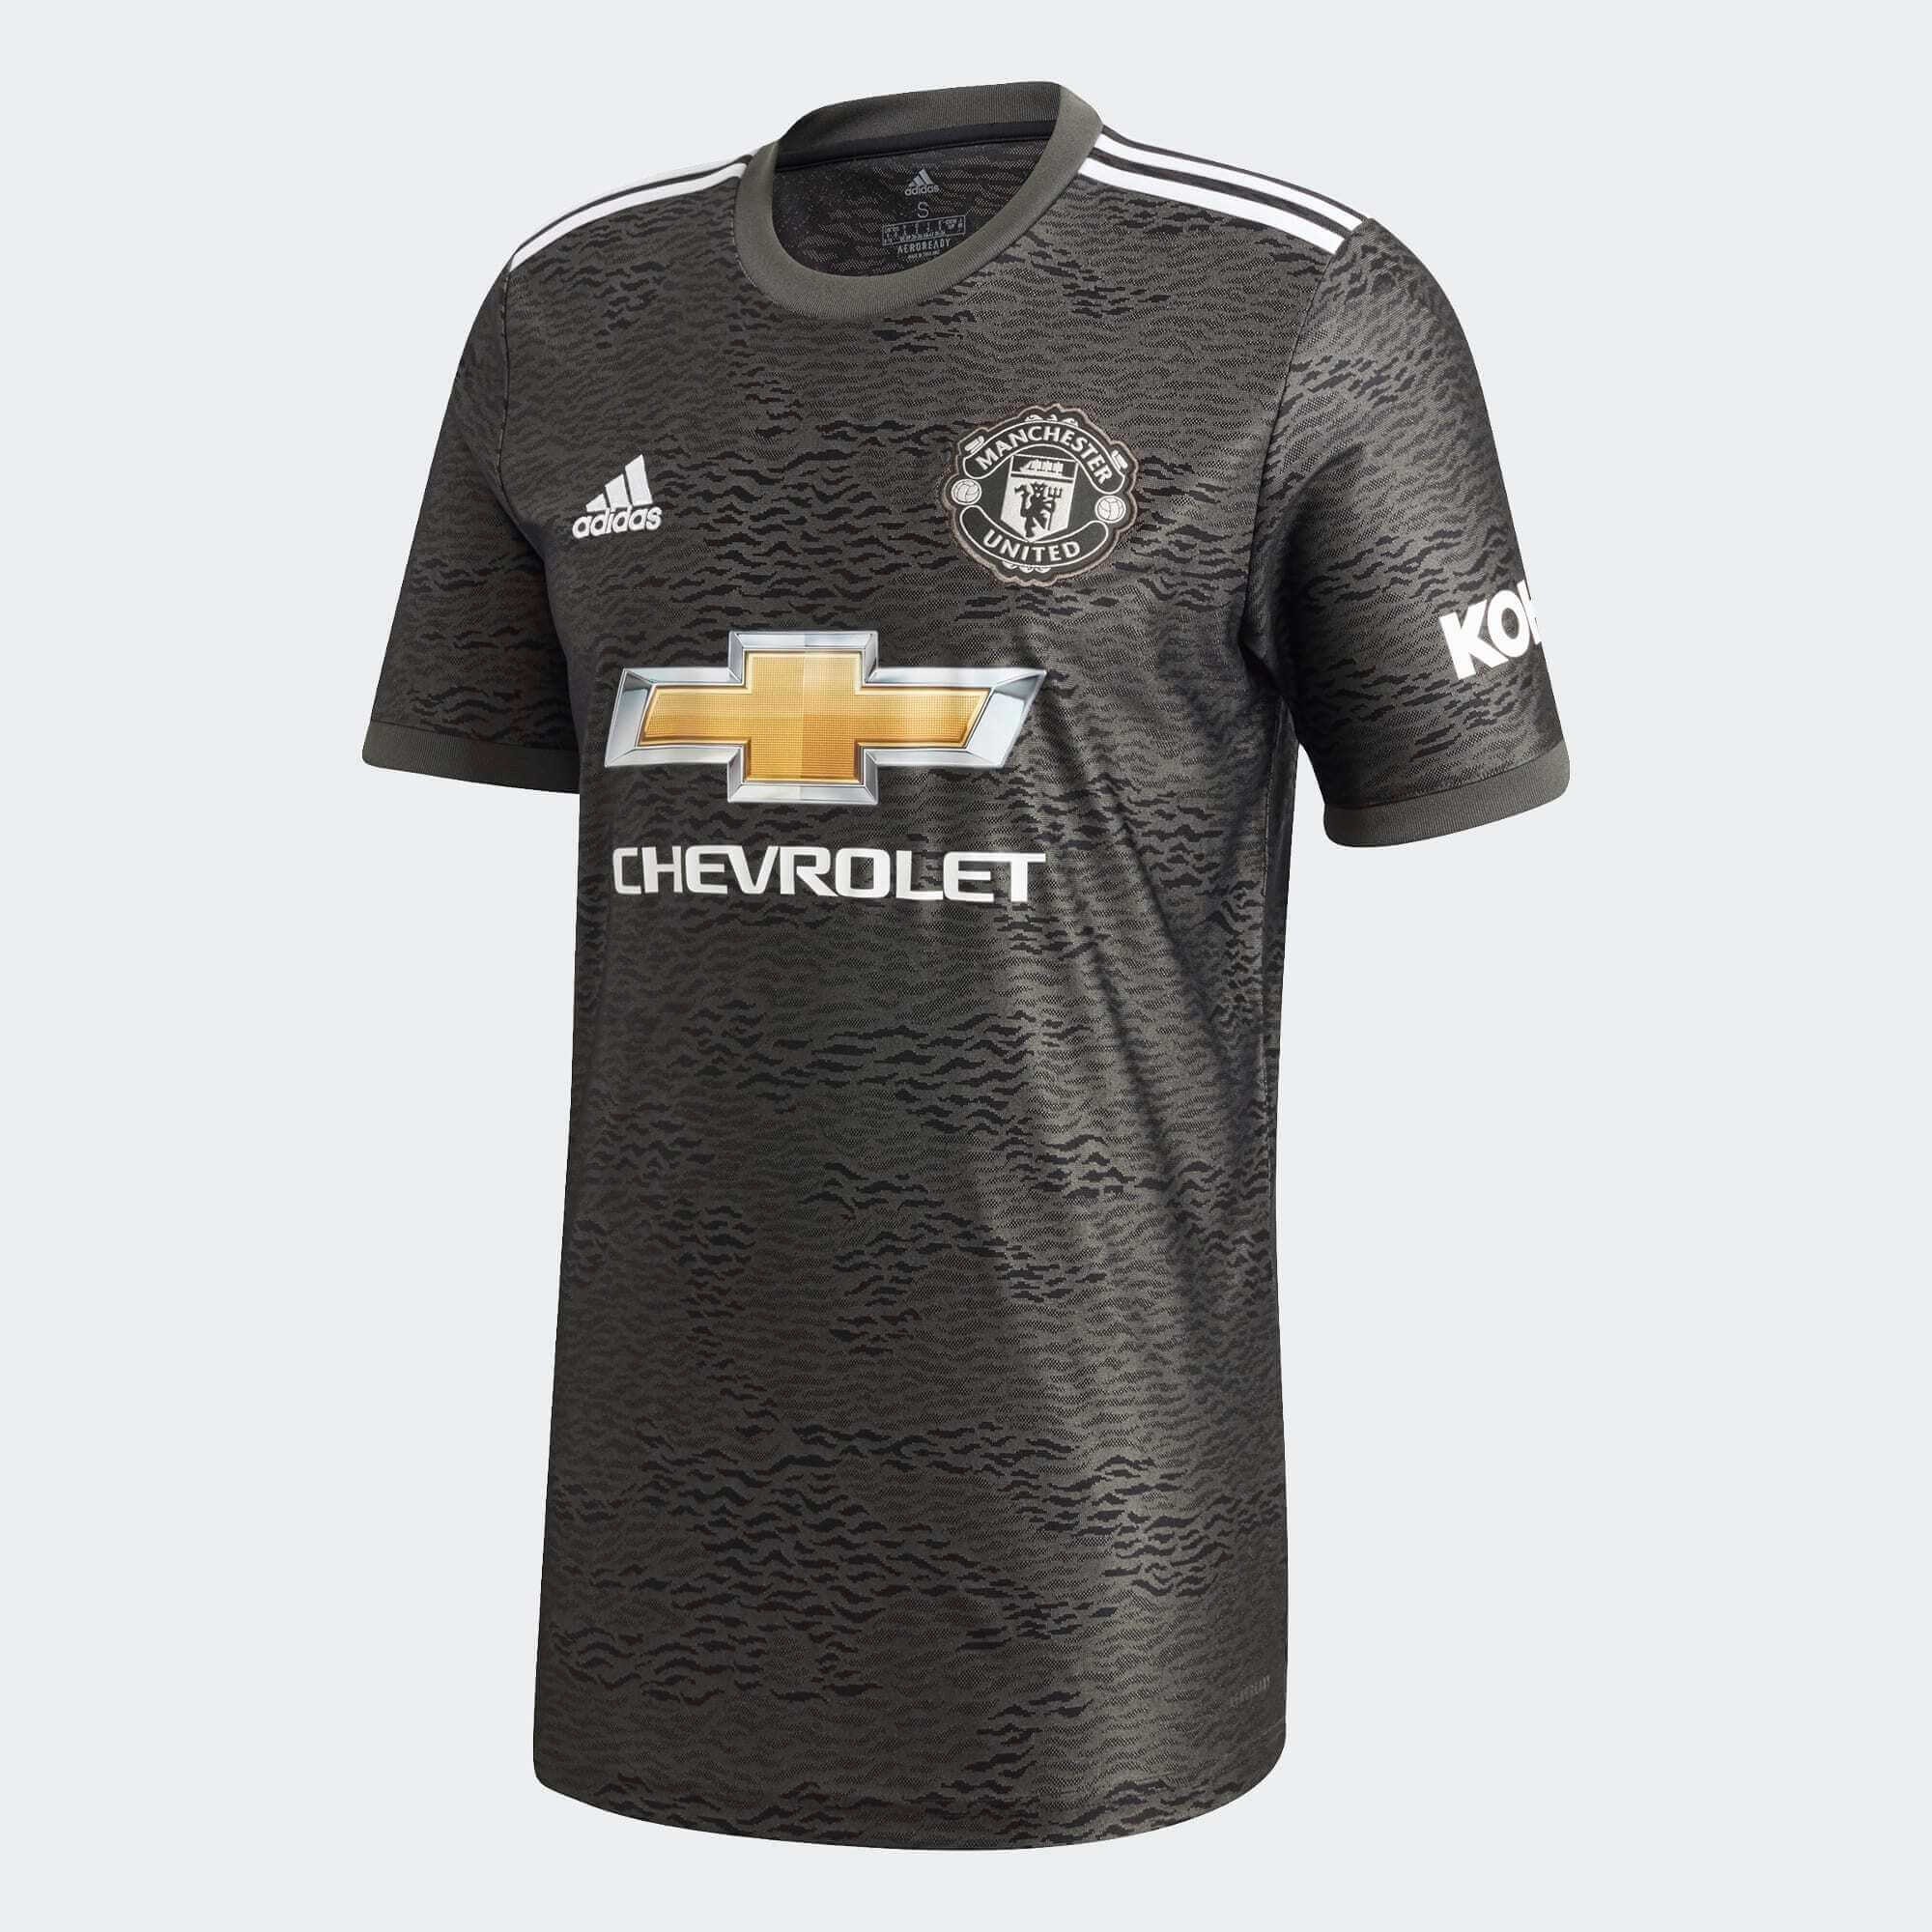 maillots de manchester united